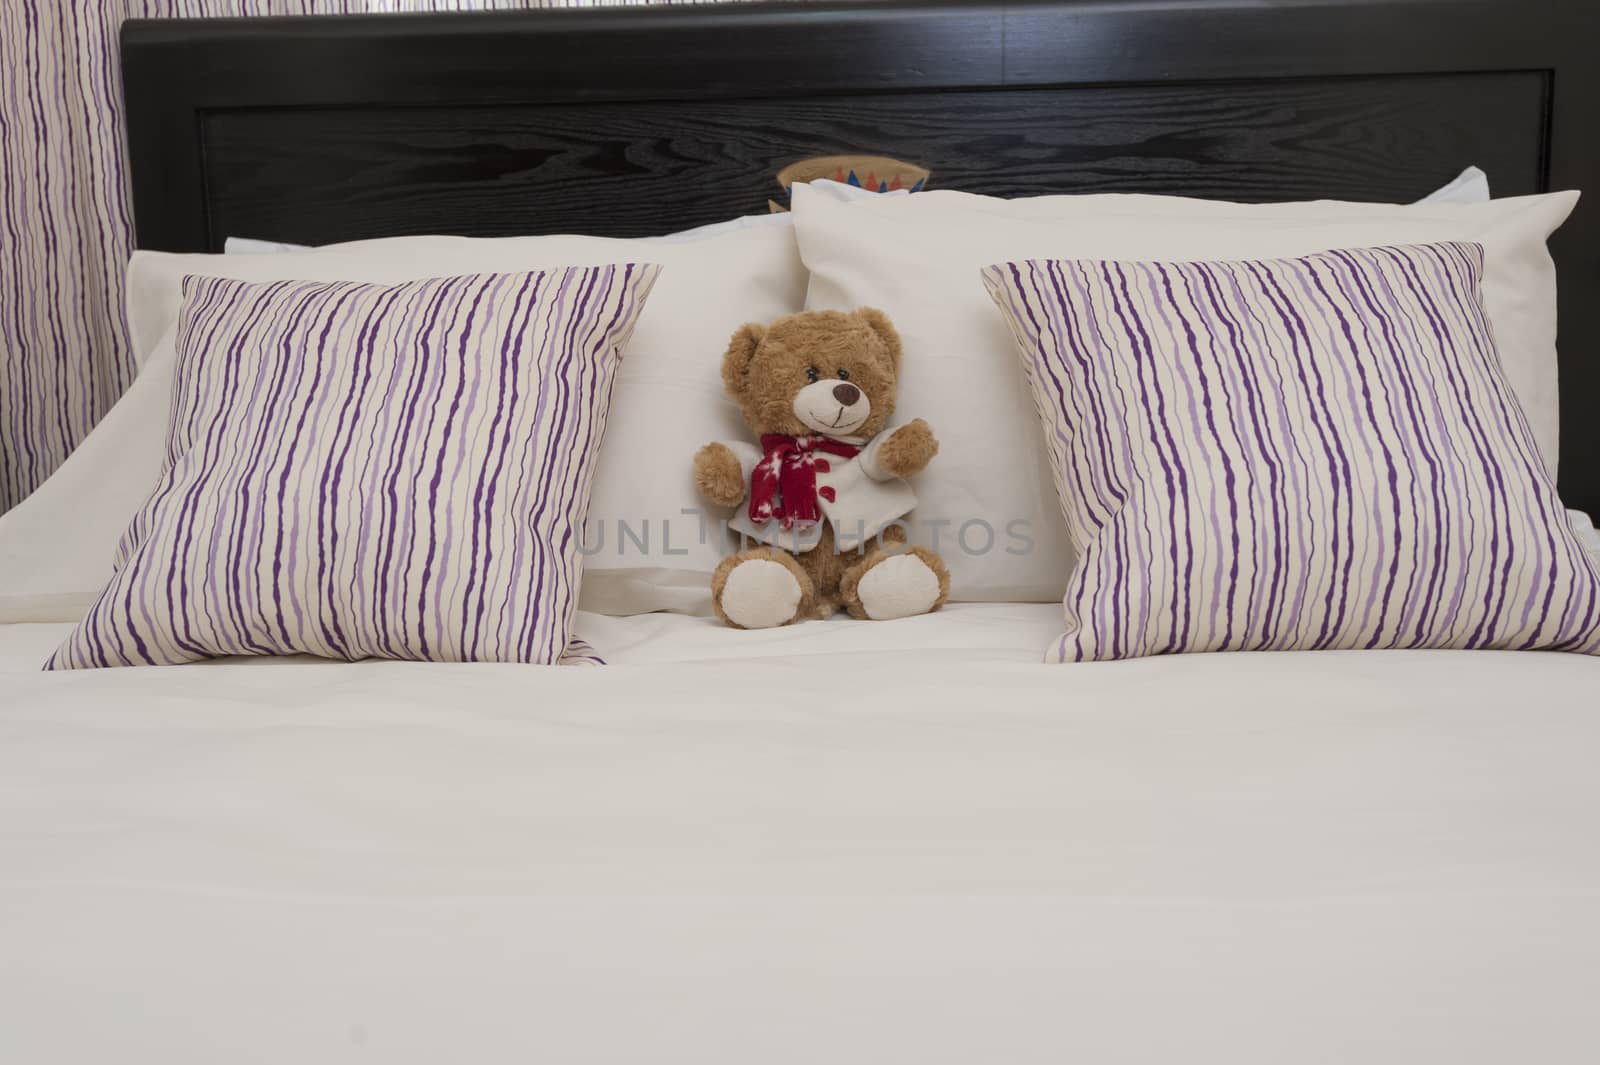 Teddy bear and pillows on a bed in a bedroom of apartment